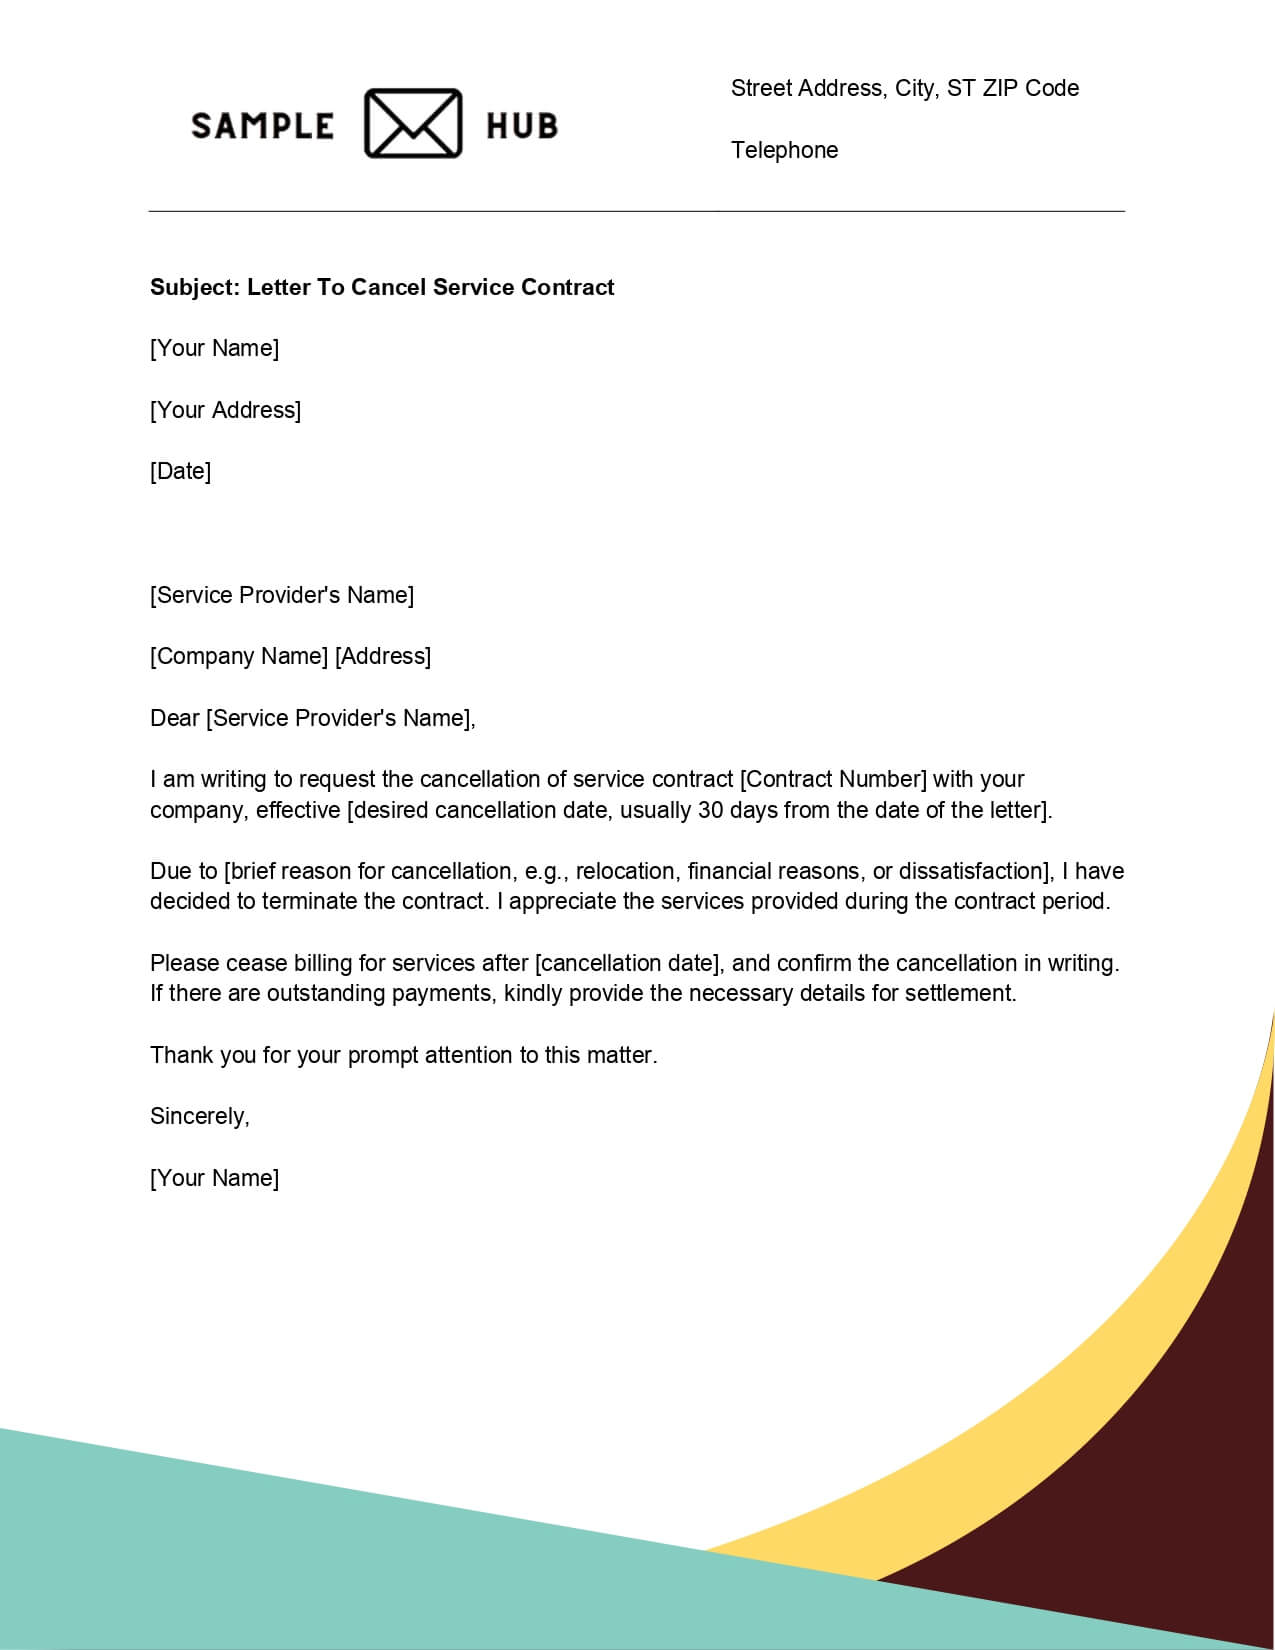 Letter To Cancel Service Contract